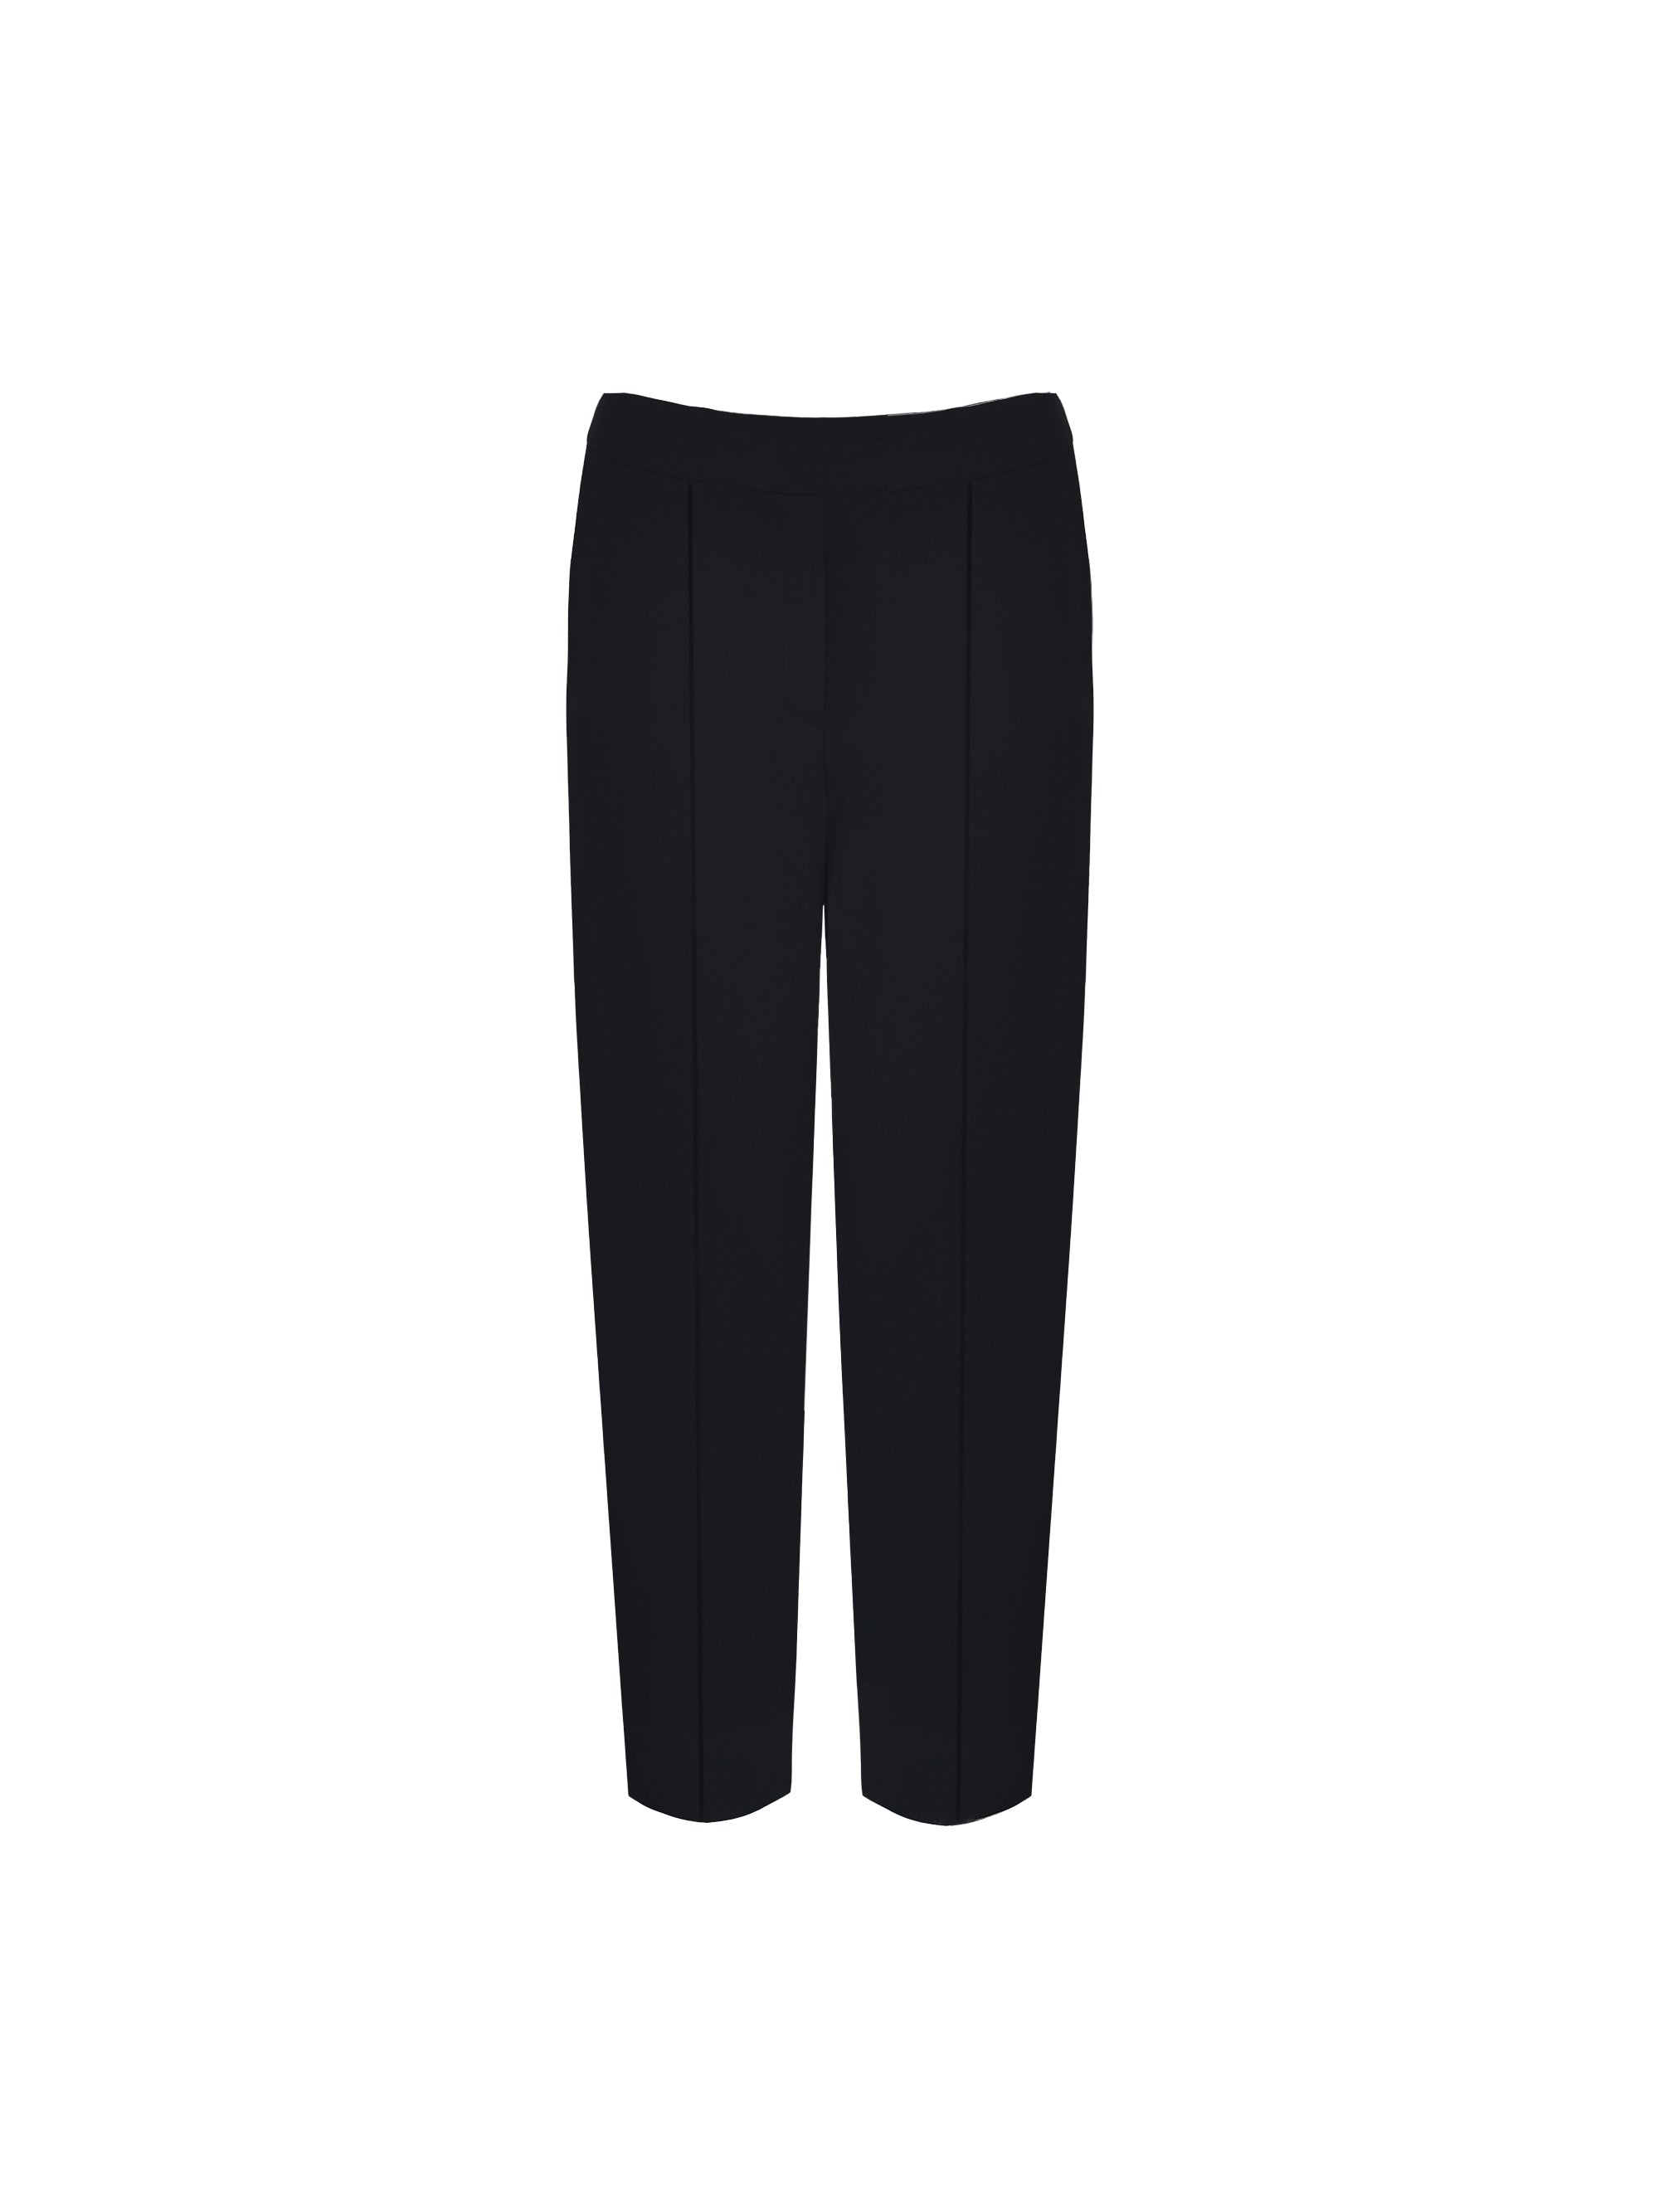 Petite Black Stretch Tapered Trousers